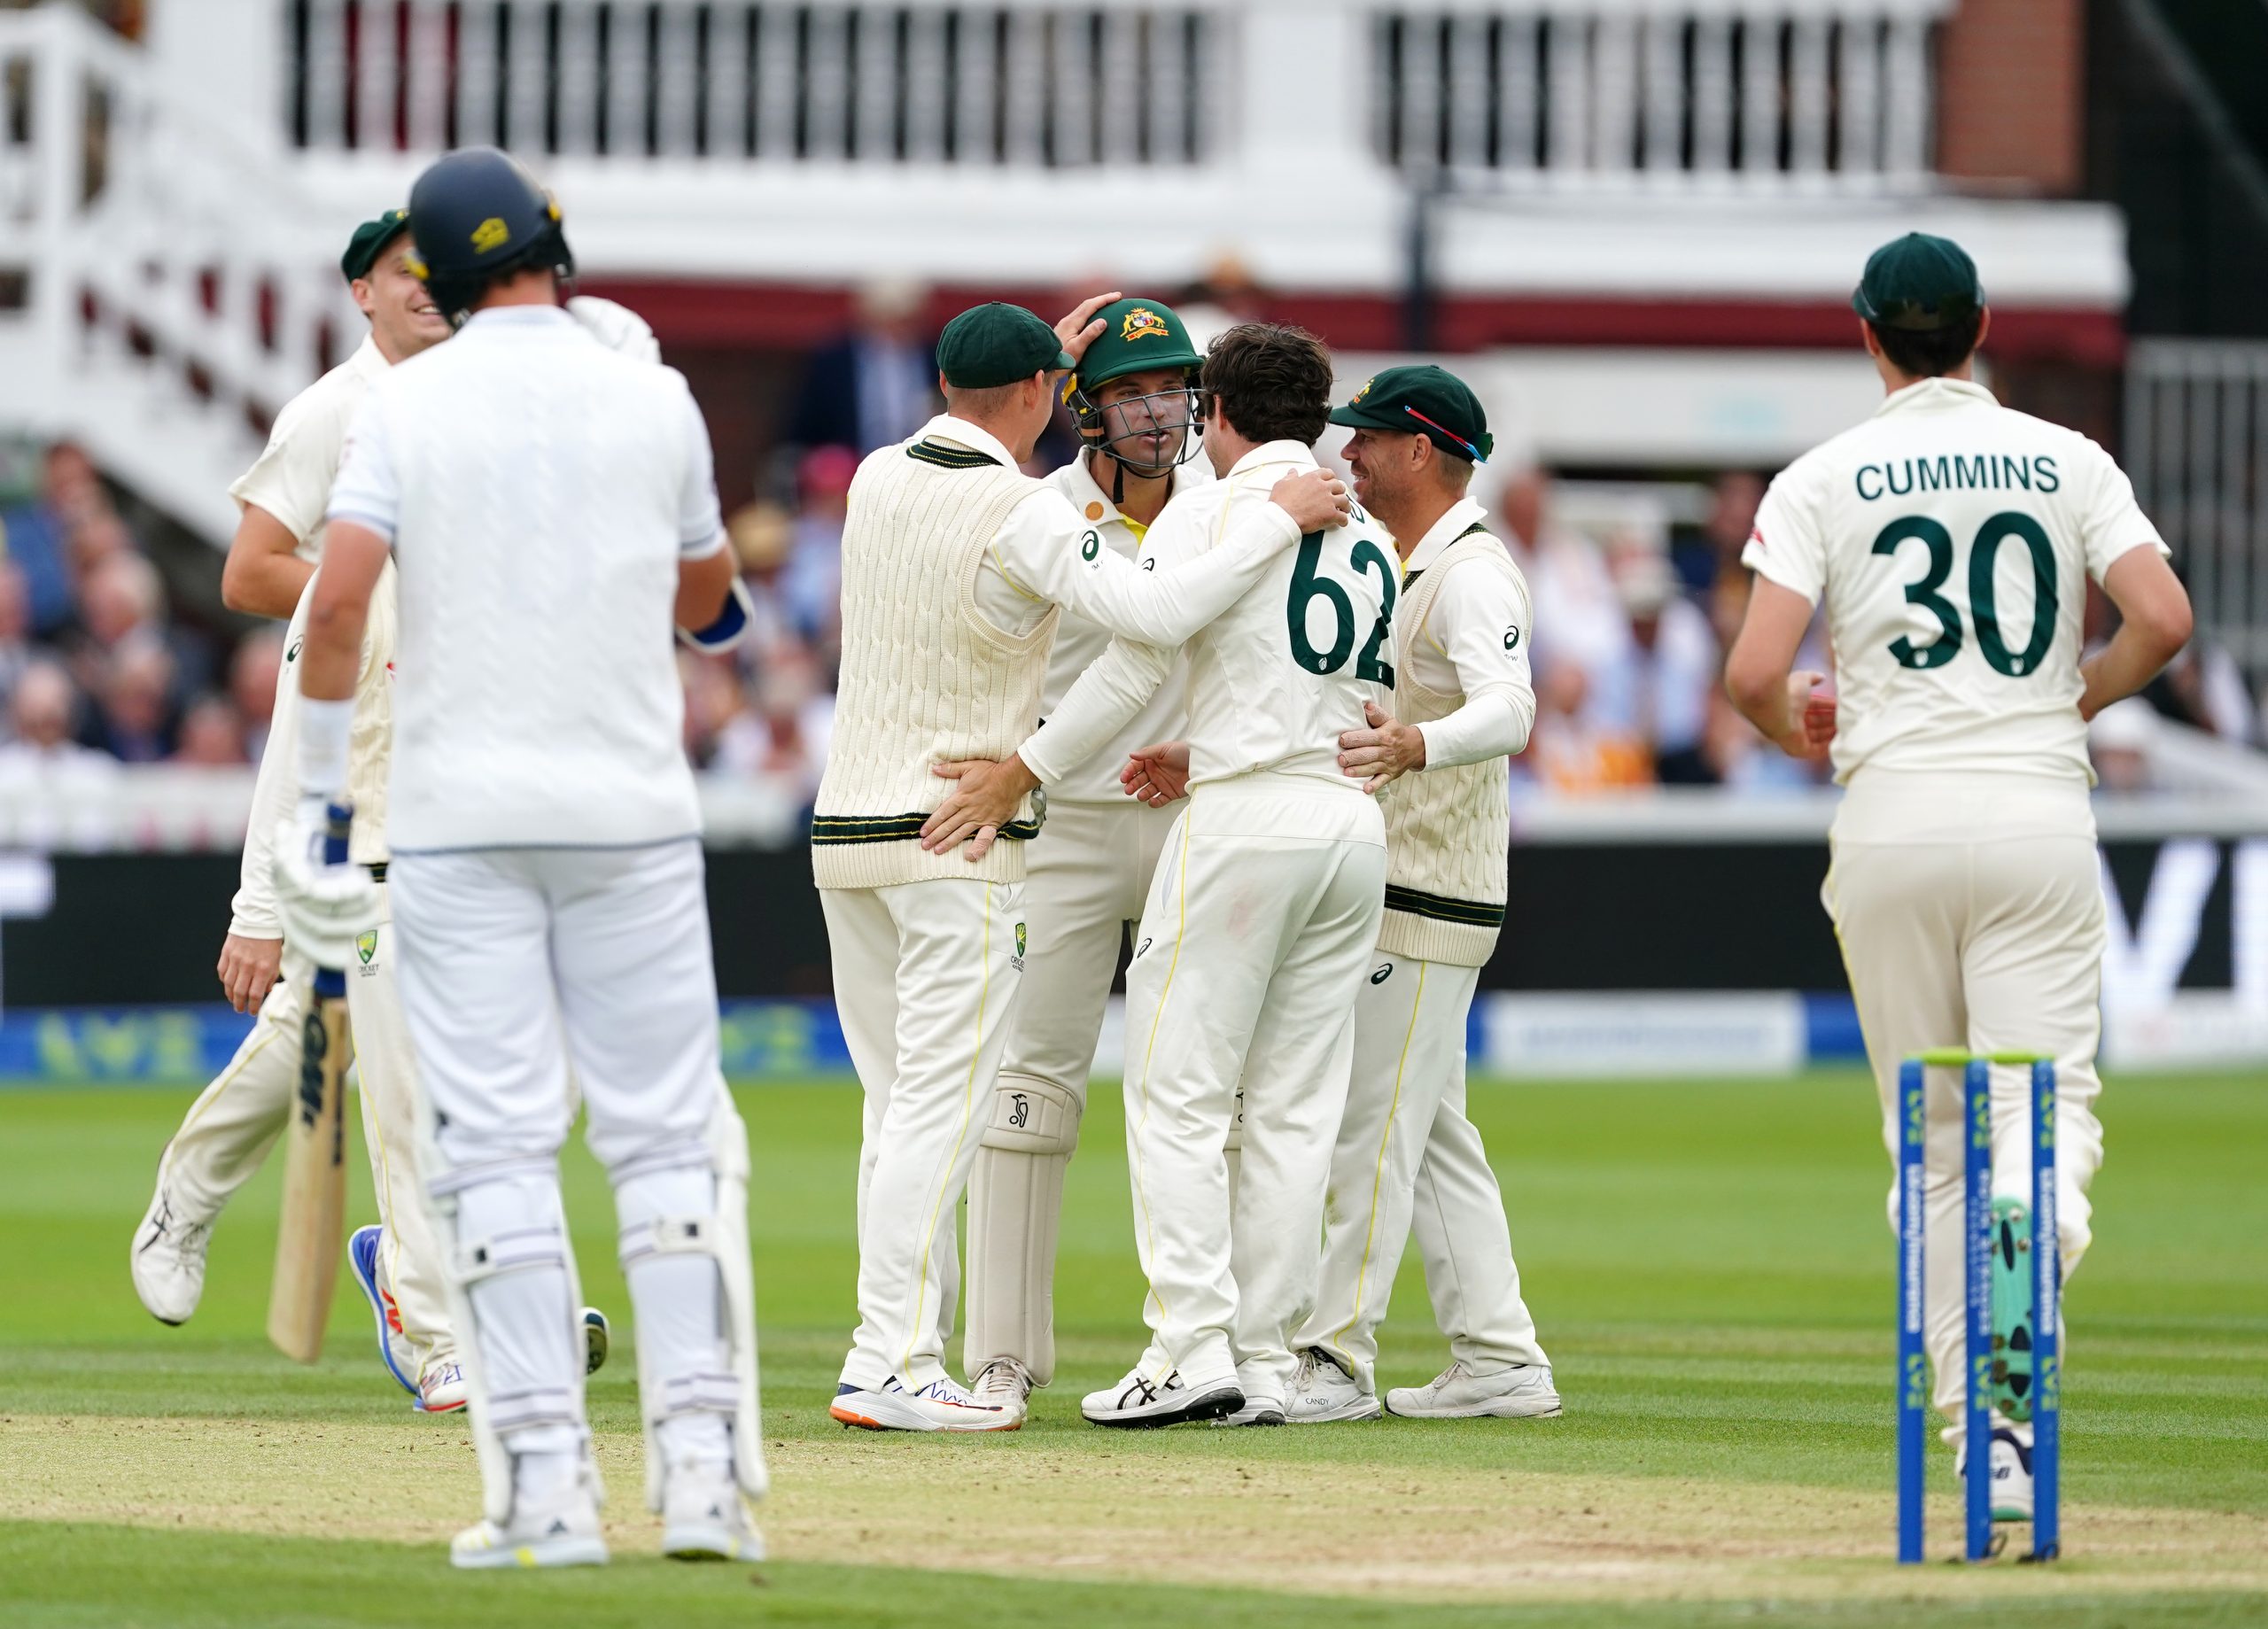 England hand control of second Ashes Test to Australia